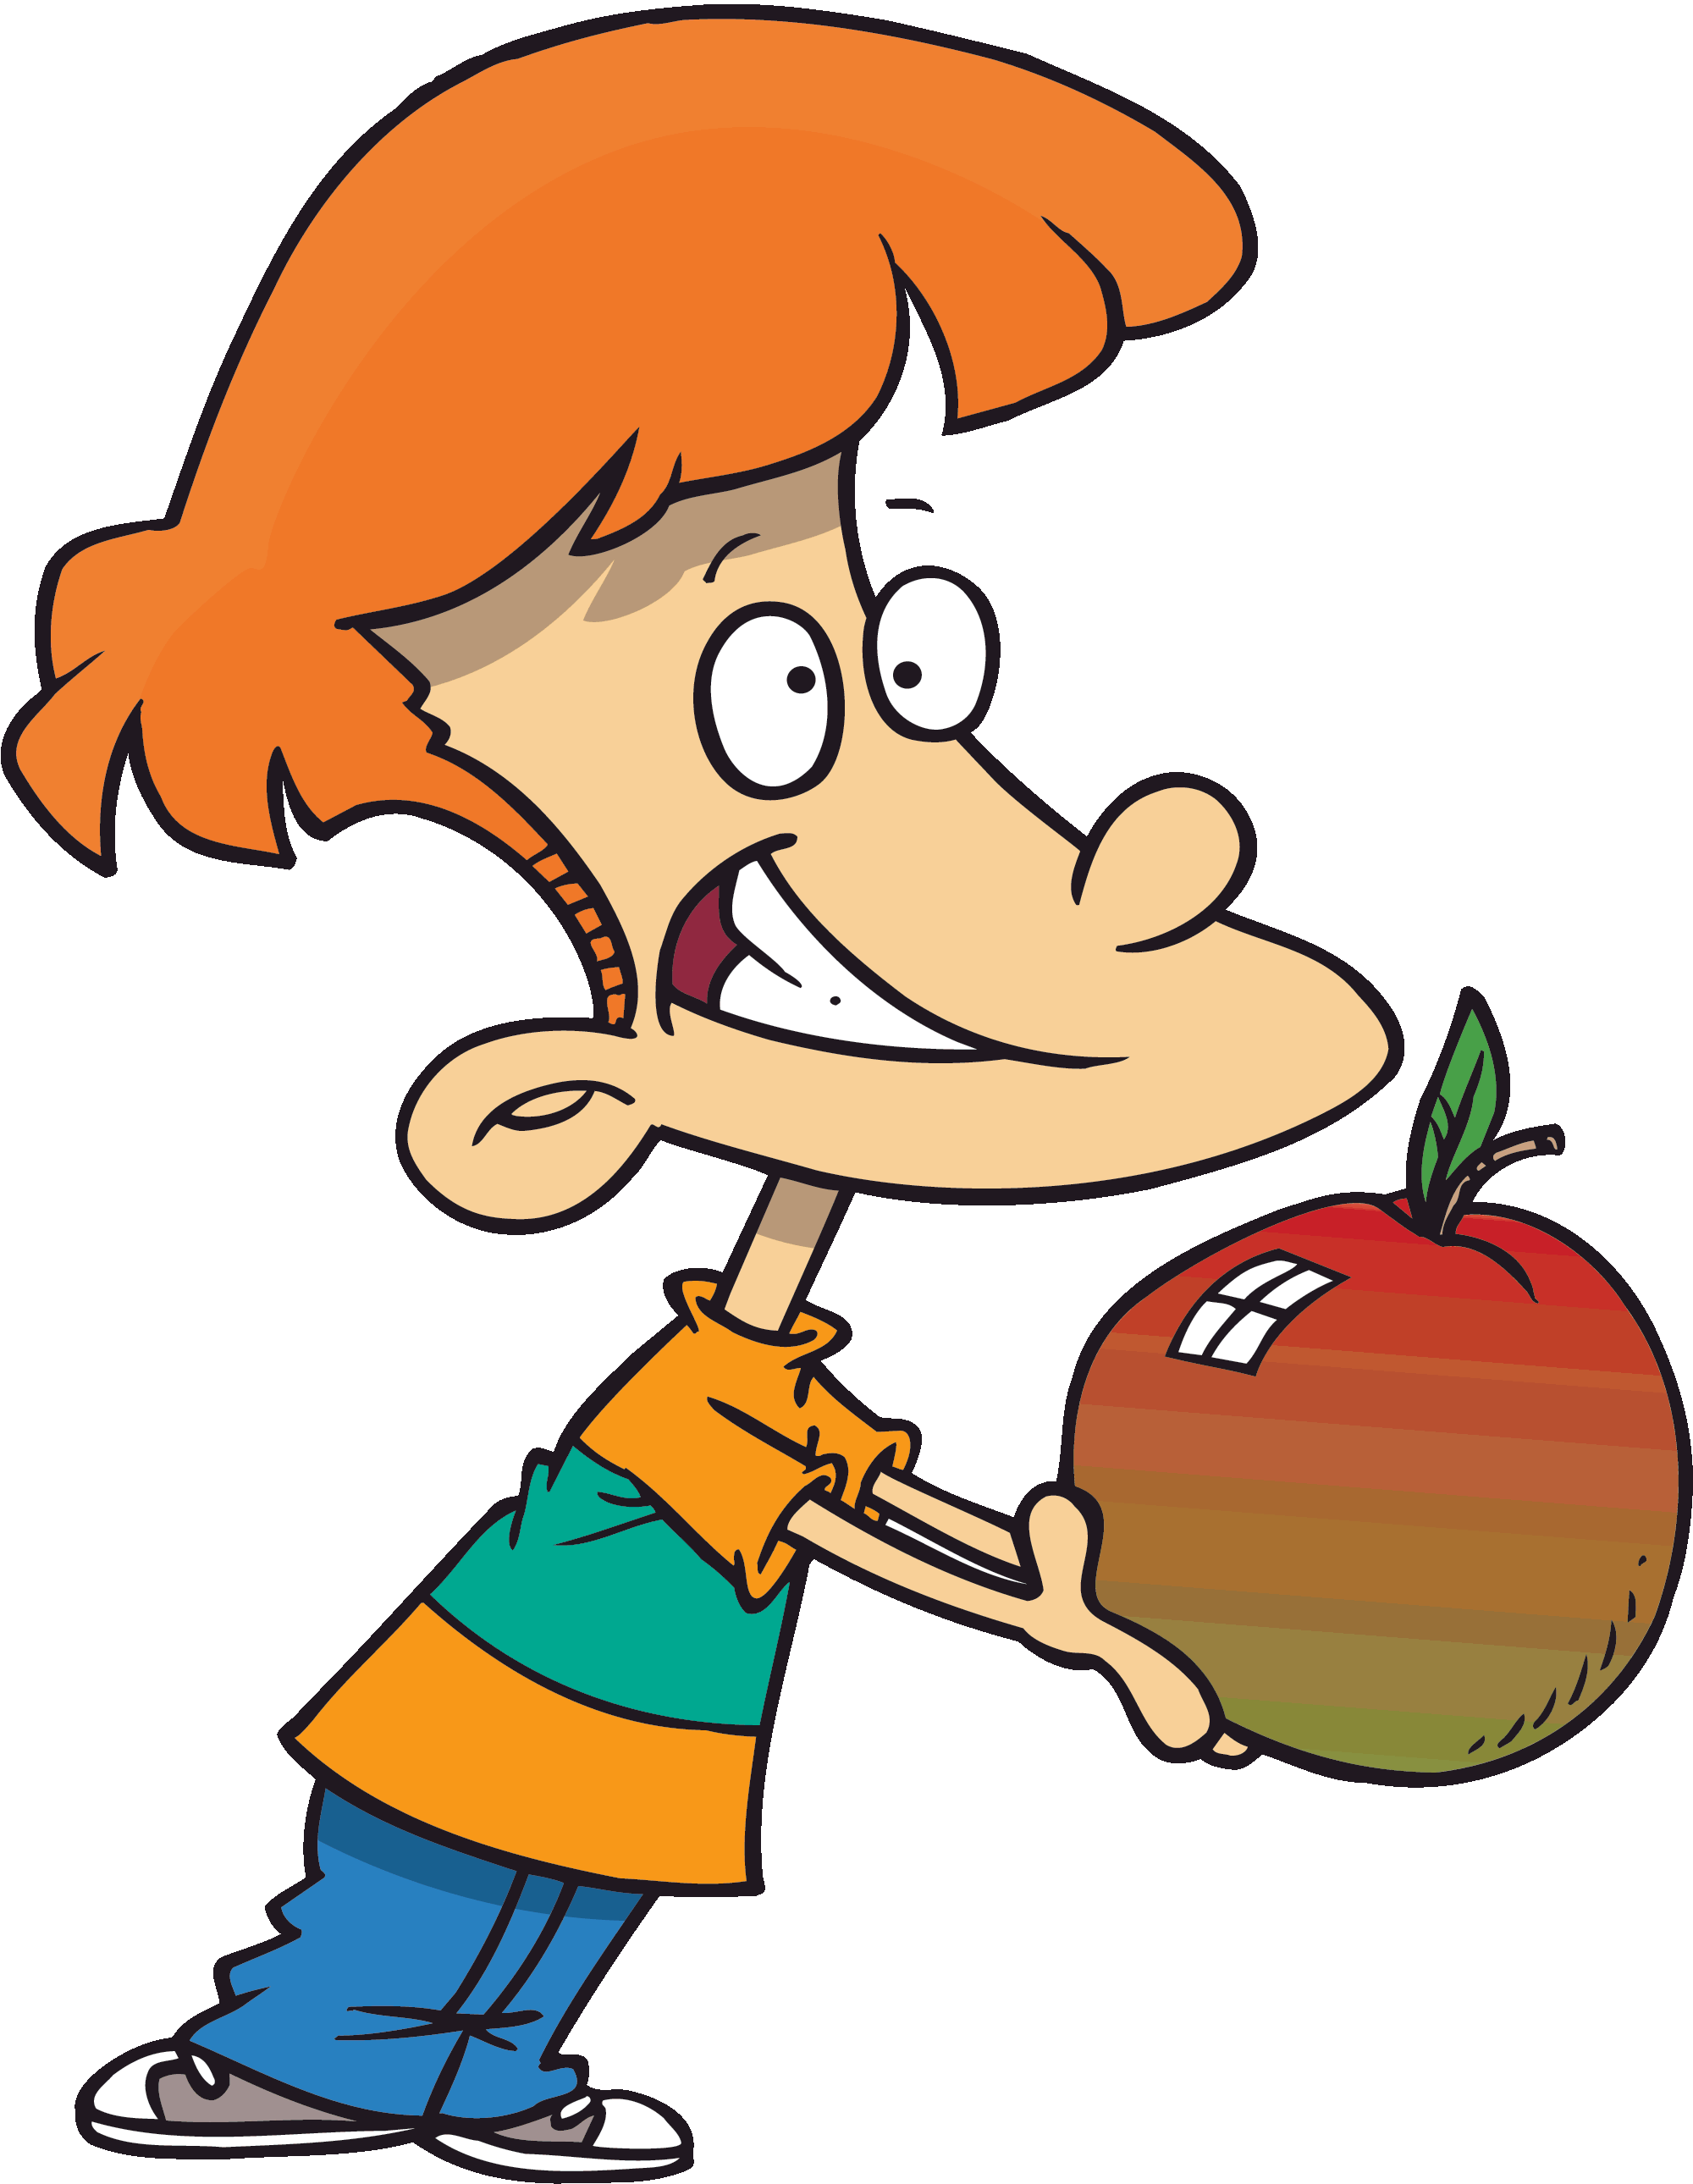 Kid clipart education. Apple picking at getdrawings